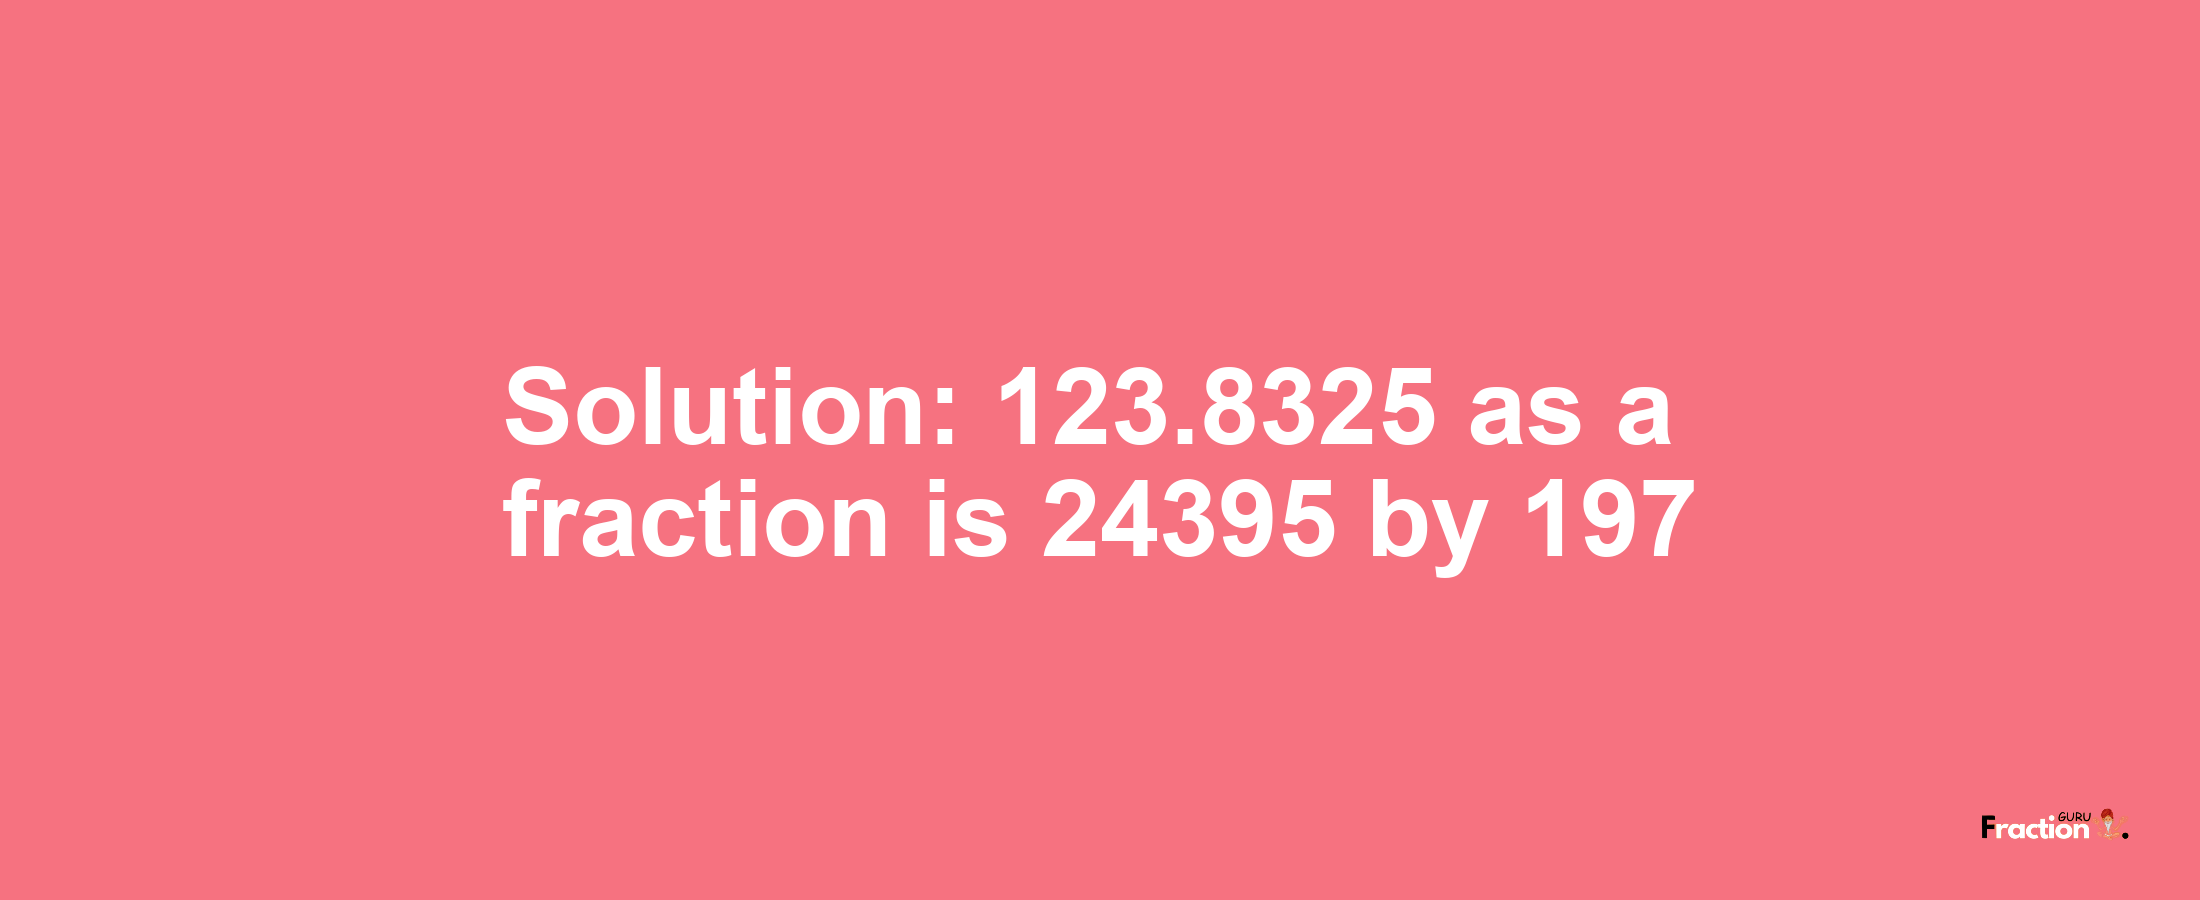 Solution:123.8325 as a fraction is 24395/197